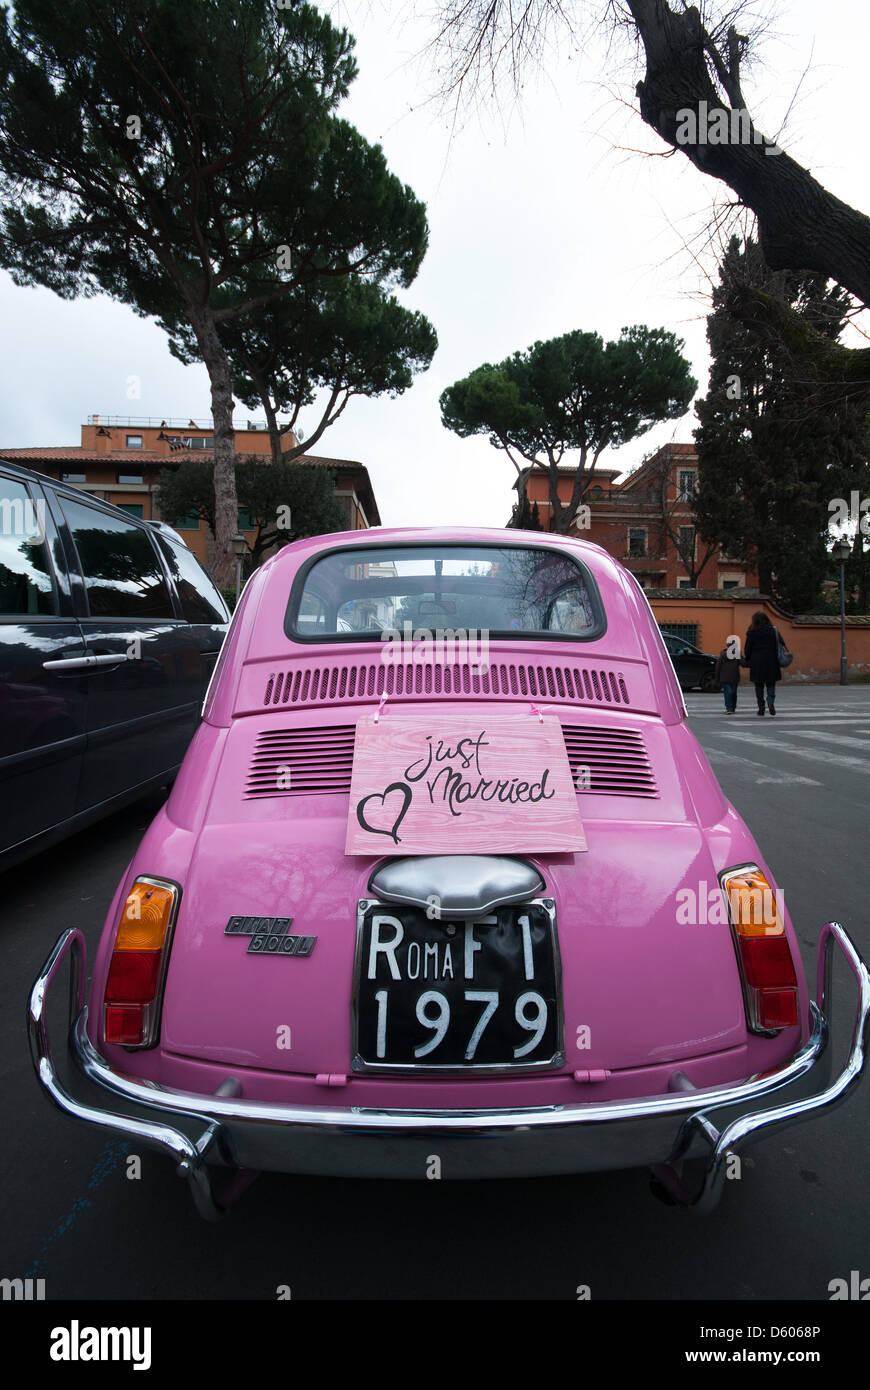 ROME, ITALY. Rear view of a pink Fiat 500L with 'Just married' sign. 2013. Stock Photo